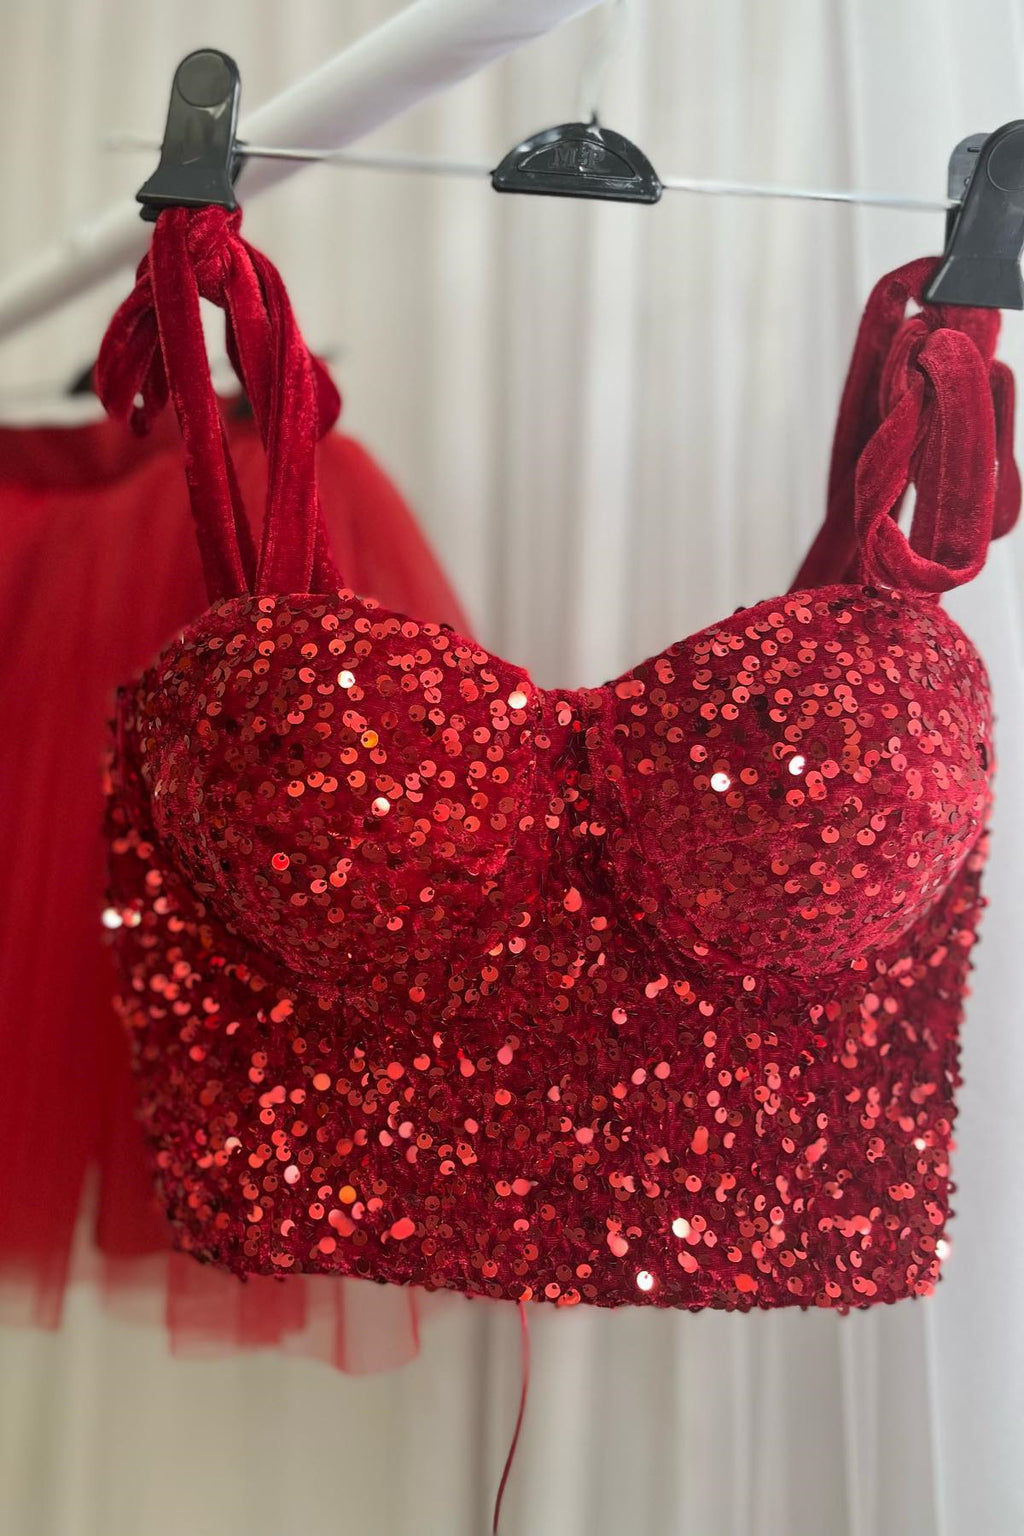 RED SEQUIN & GOLD SPIKE BRA TOP NWT BY OH YES SMALL